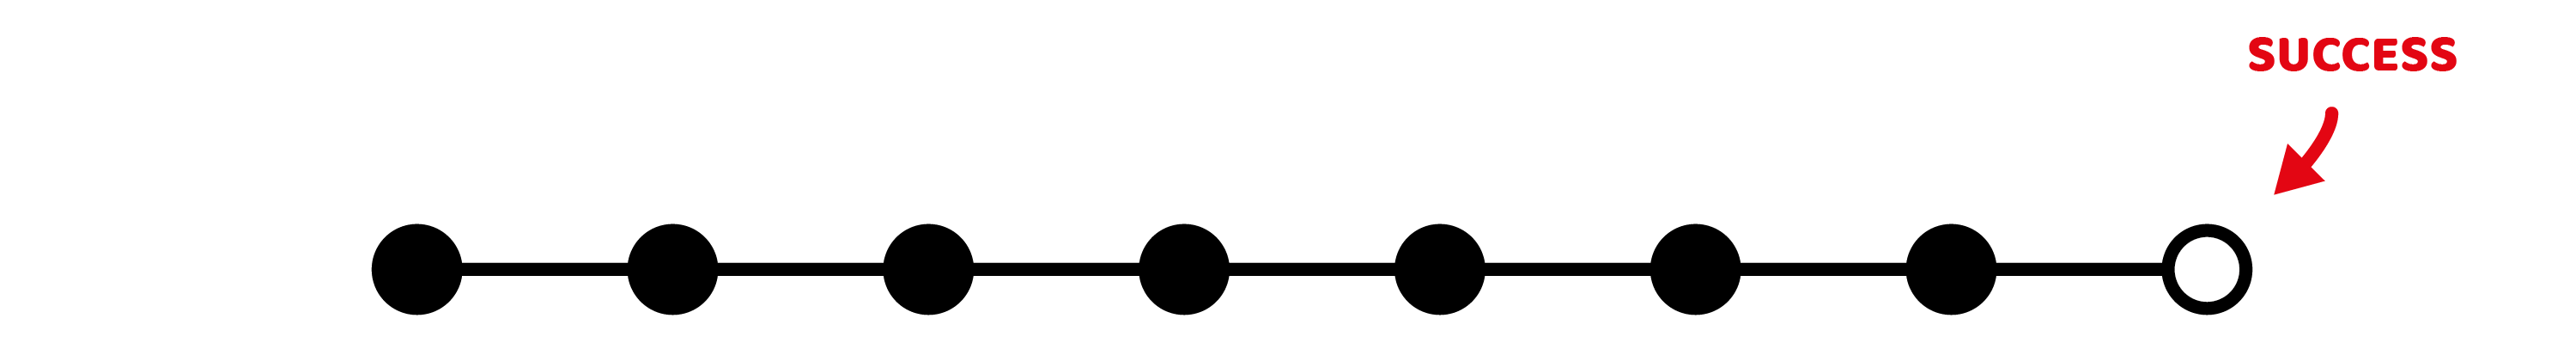 Row of black equidistant black dots on a horizontal black line. The final dot has a black border with a white fill, and arrow indicated this notation means success.